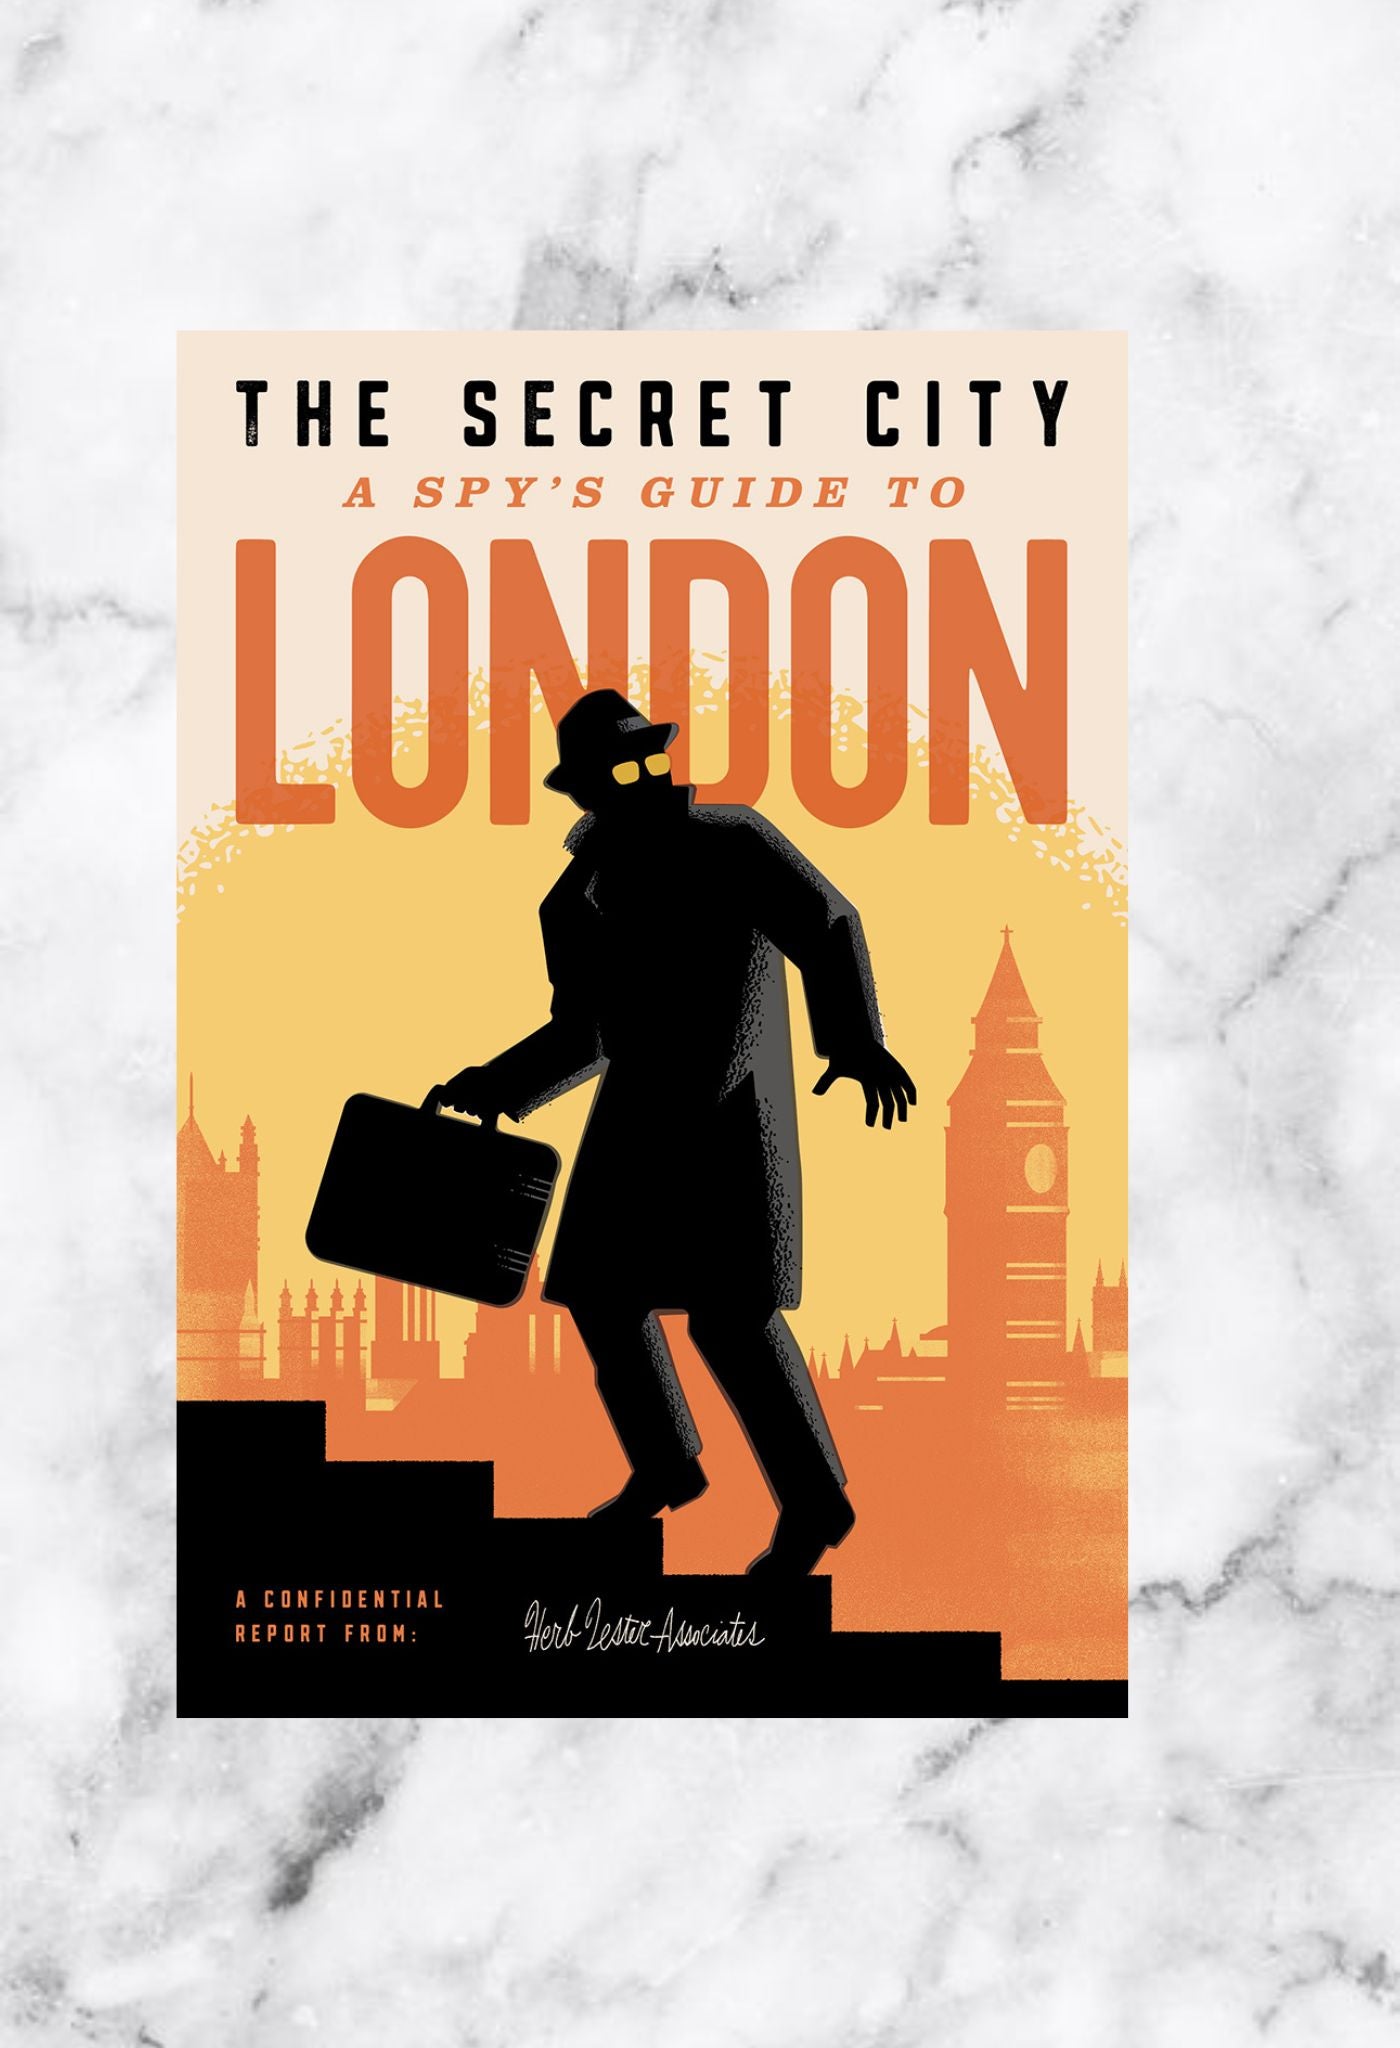 The Secret City A Spies Guide to London